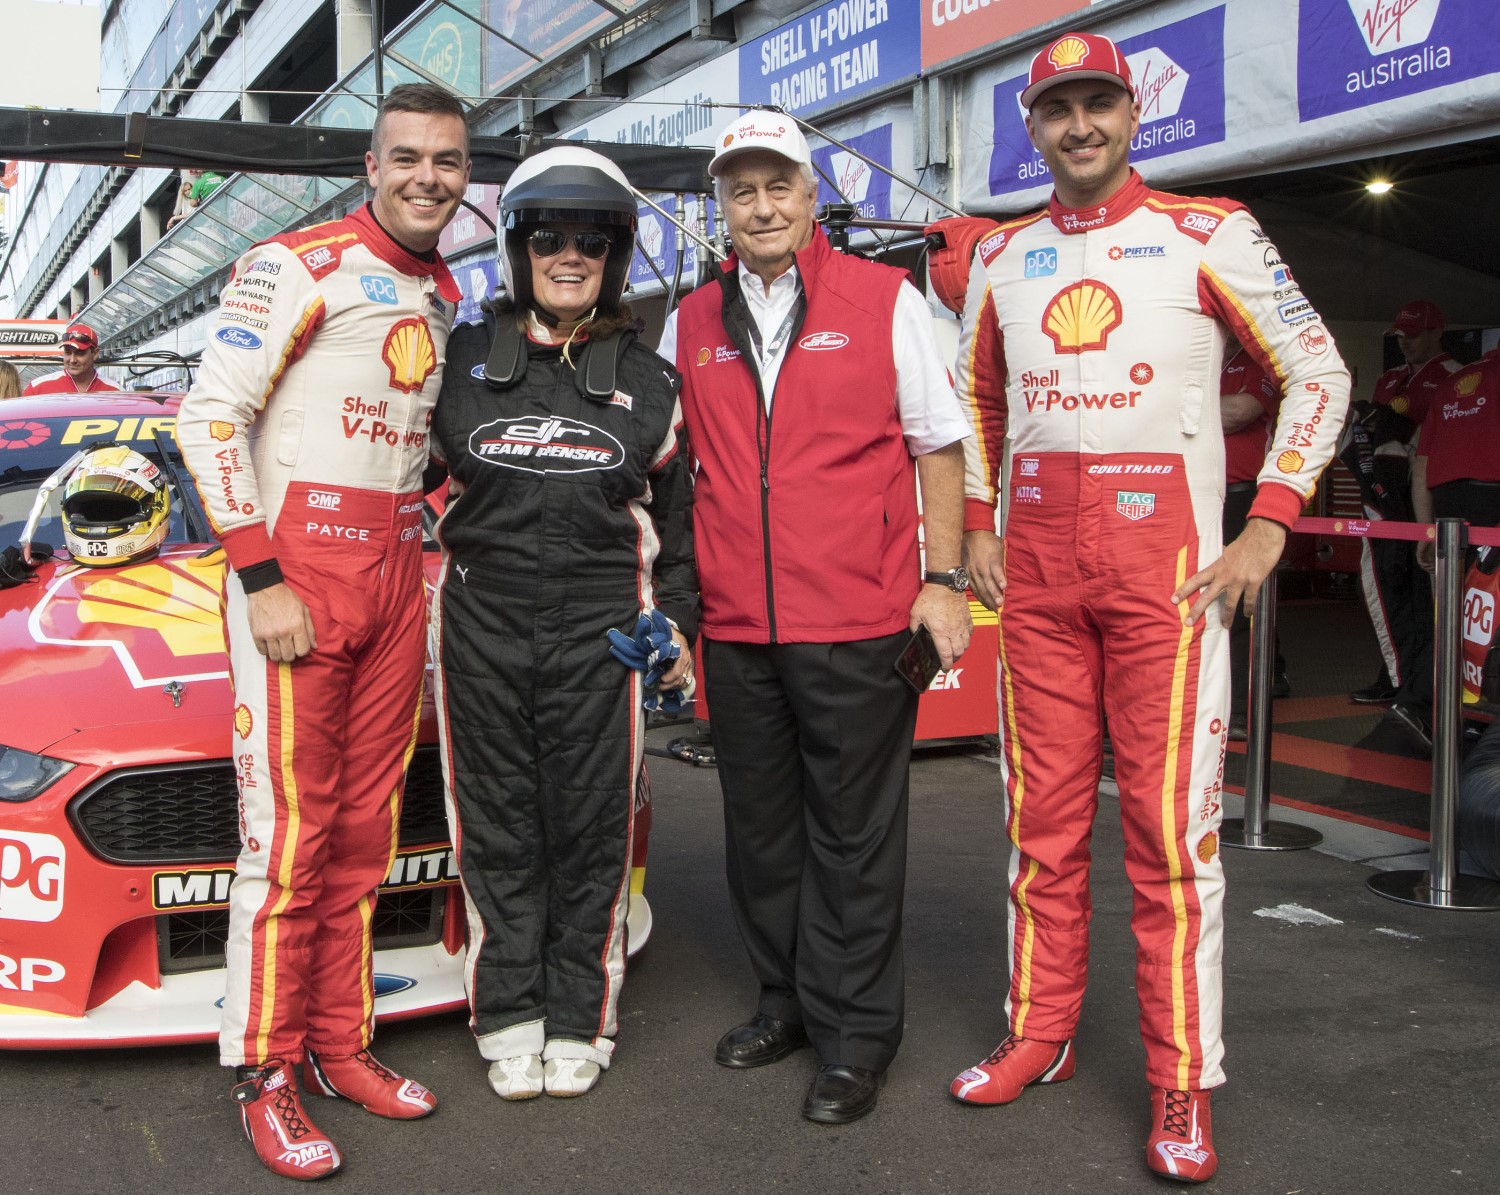 Penske was in Australia this weekend with his Supercars team